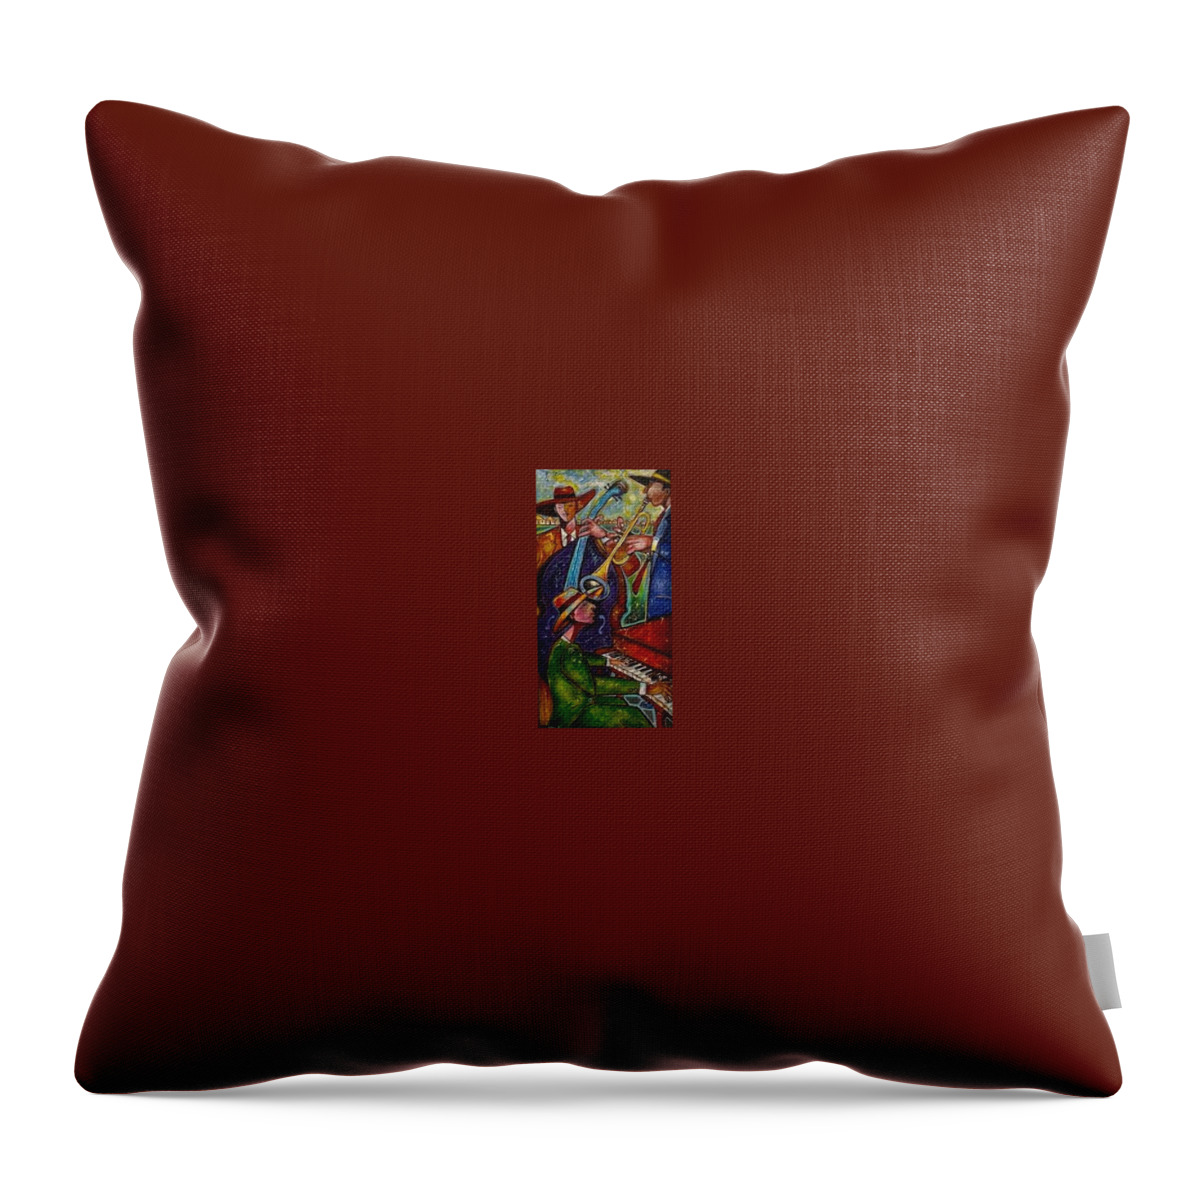 Abstract Music Art Throw Pillow featuring the painting Internationa Blues by Emery Franklin